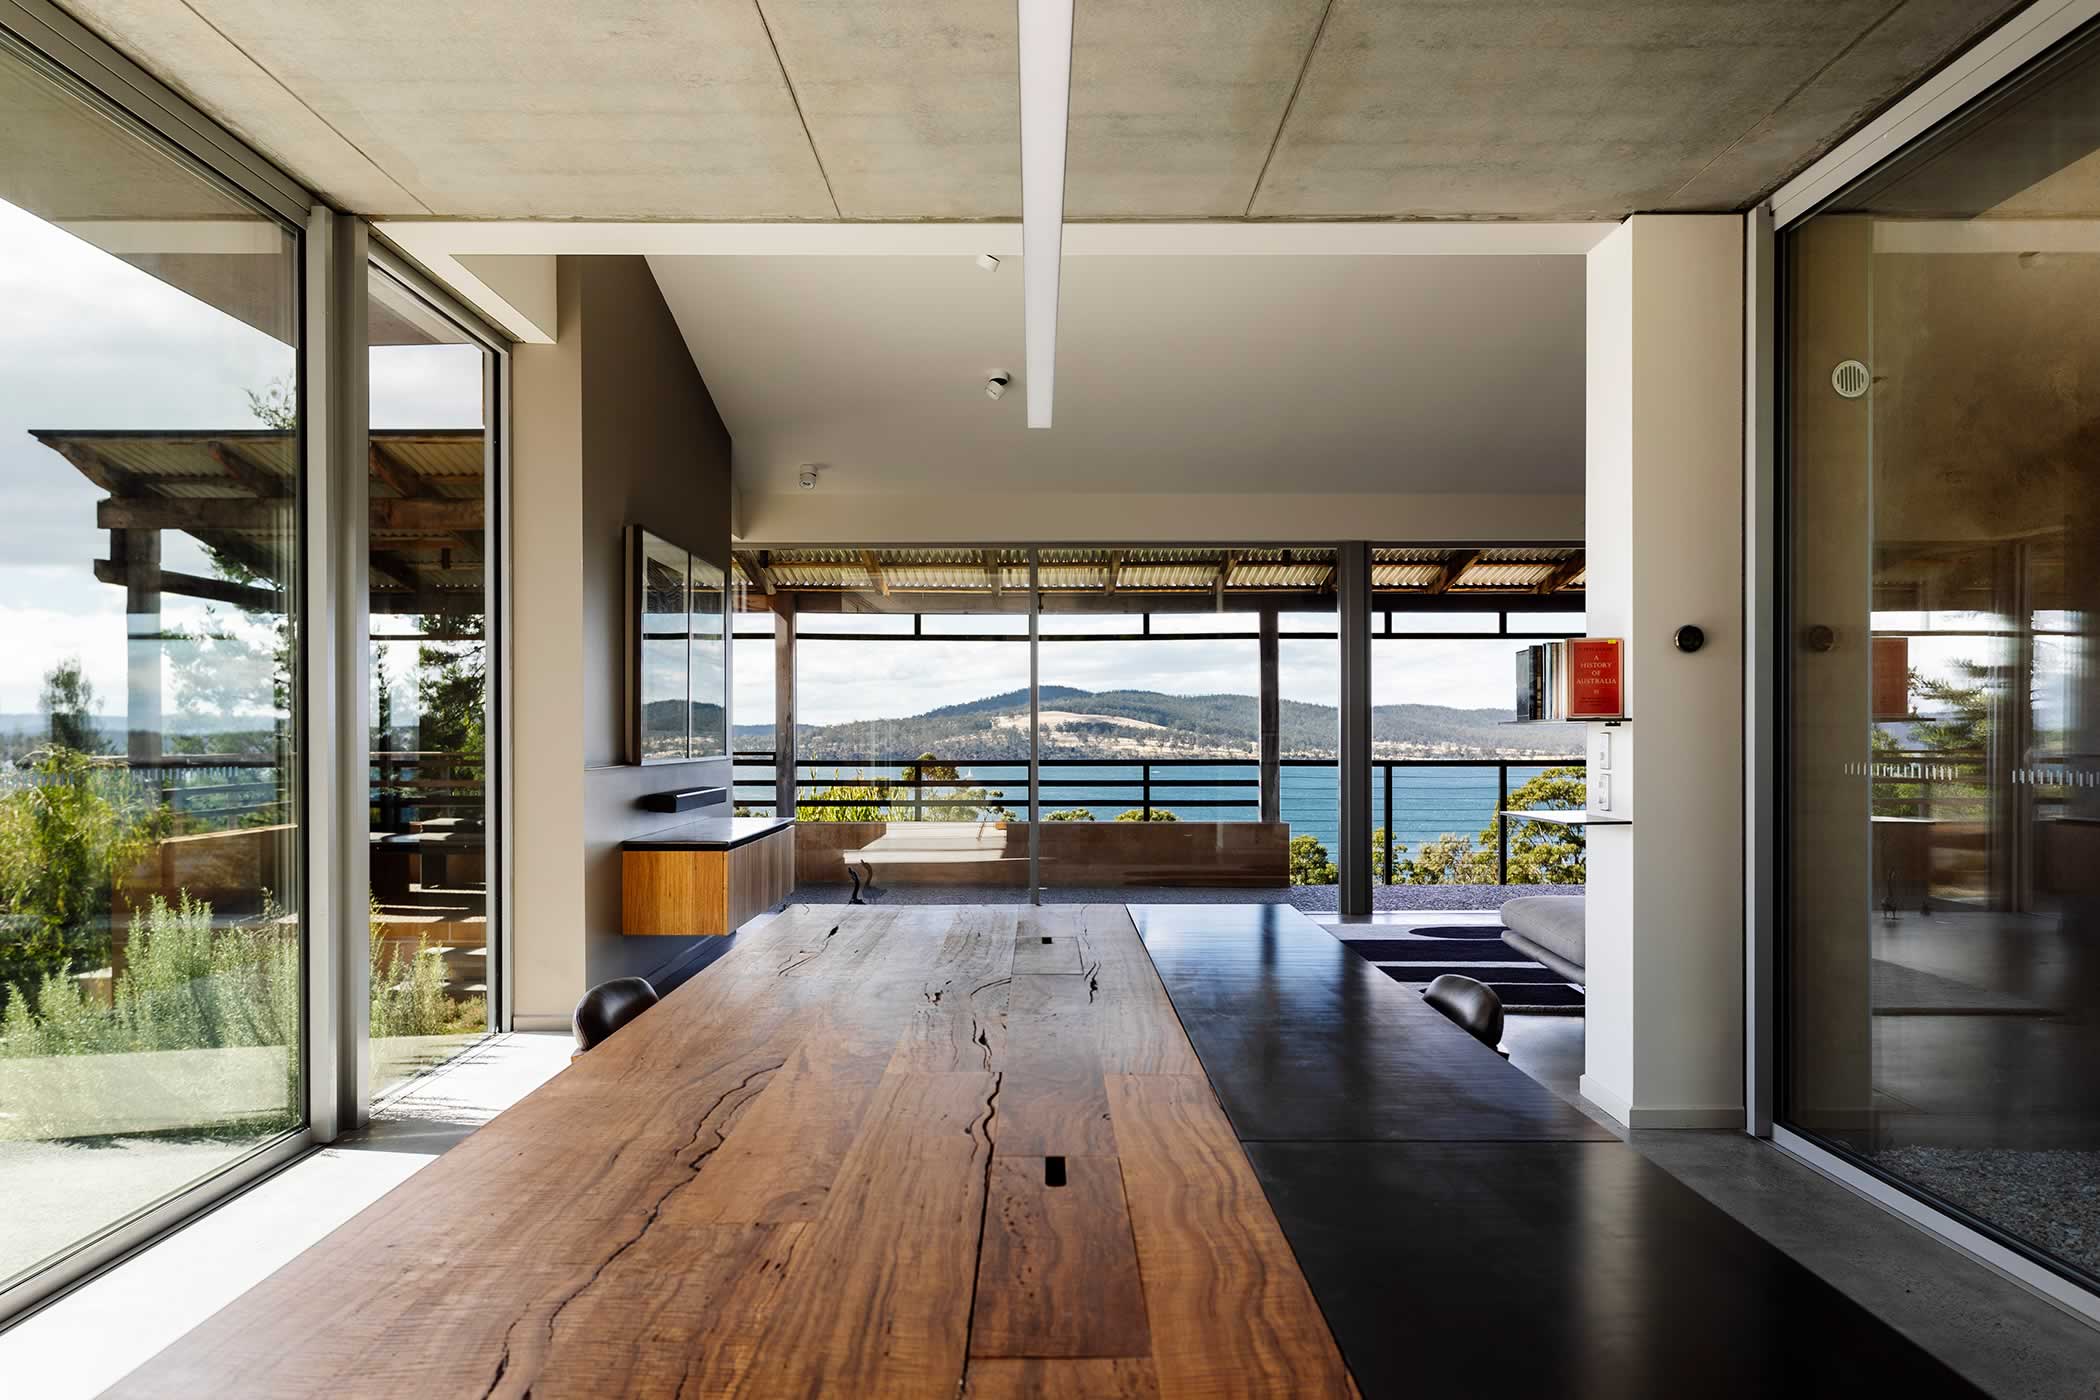 Residential extension, Kettering, Tasmania: The studio links through the extended lounge linking to an expansive Tasmanian landscape of horizontally layered water, hills and sky. Photo by Andrew Gibson. Photo by Adam Gibson.